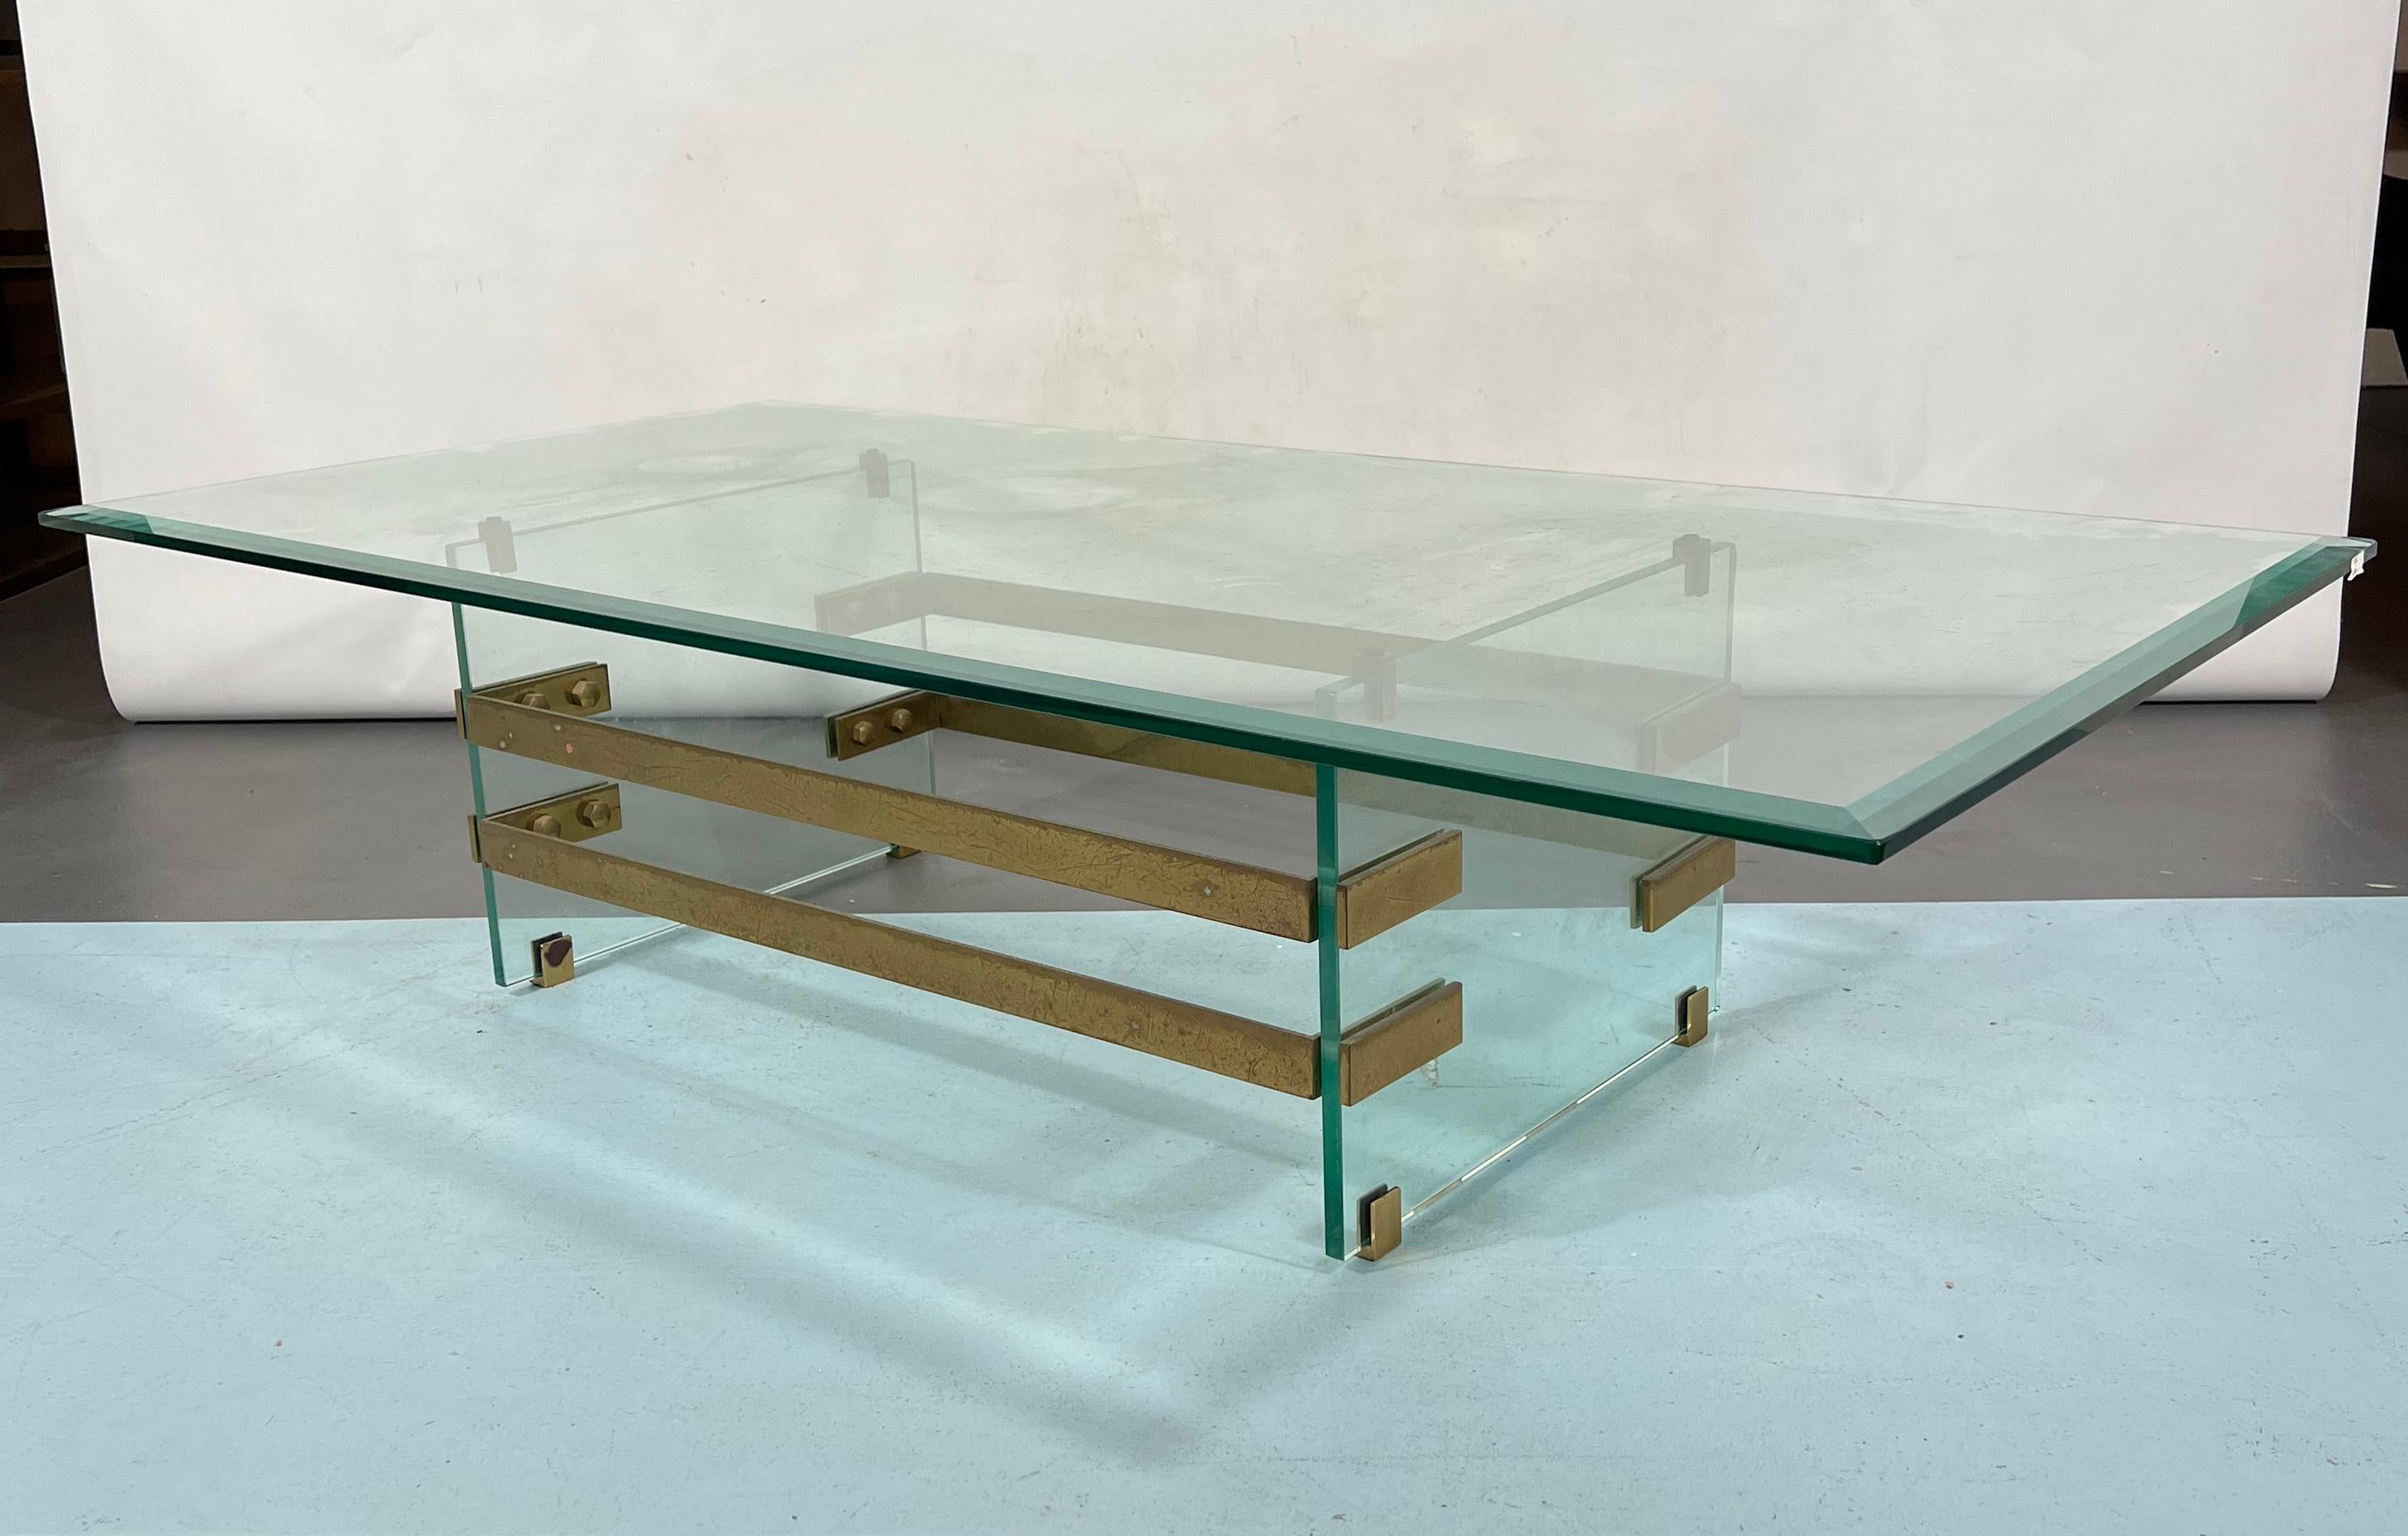 Good vintage condition with trace of age and use for this coffe table made from solid brass and thick glass. Attributed to Fontana Arte and produced in Italy during the 70s. Original patina on the brass.